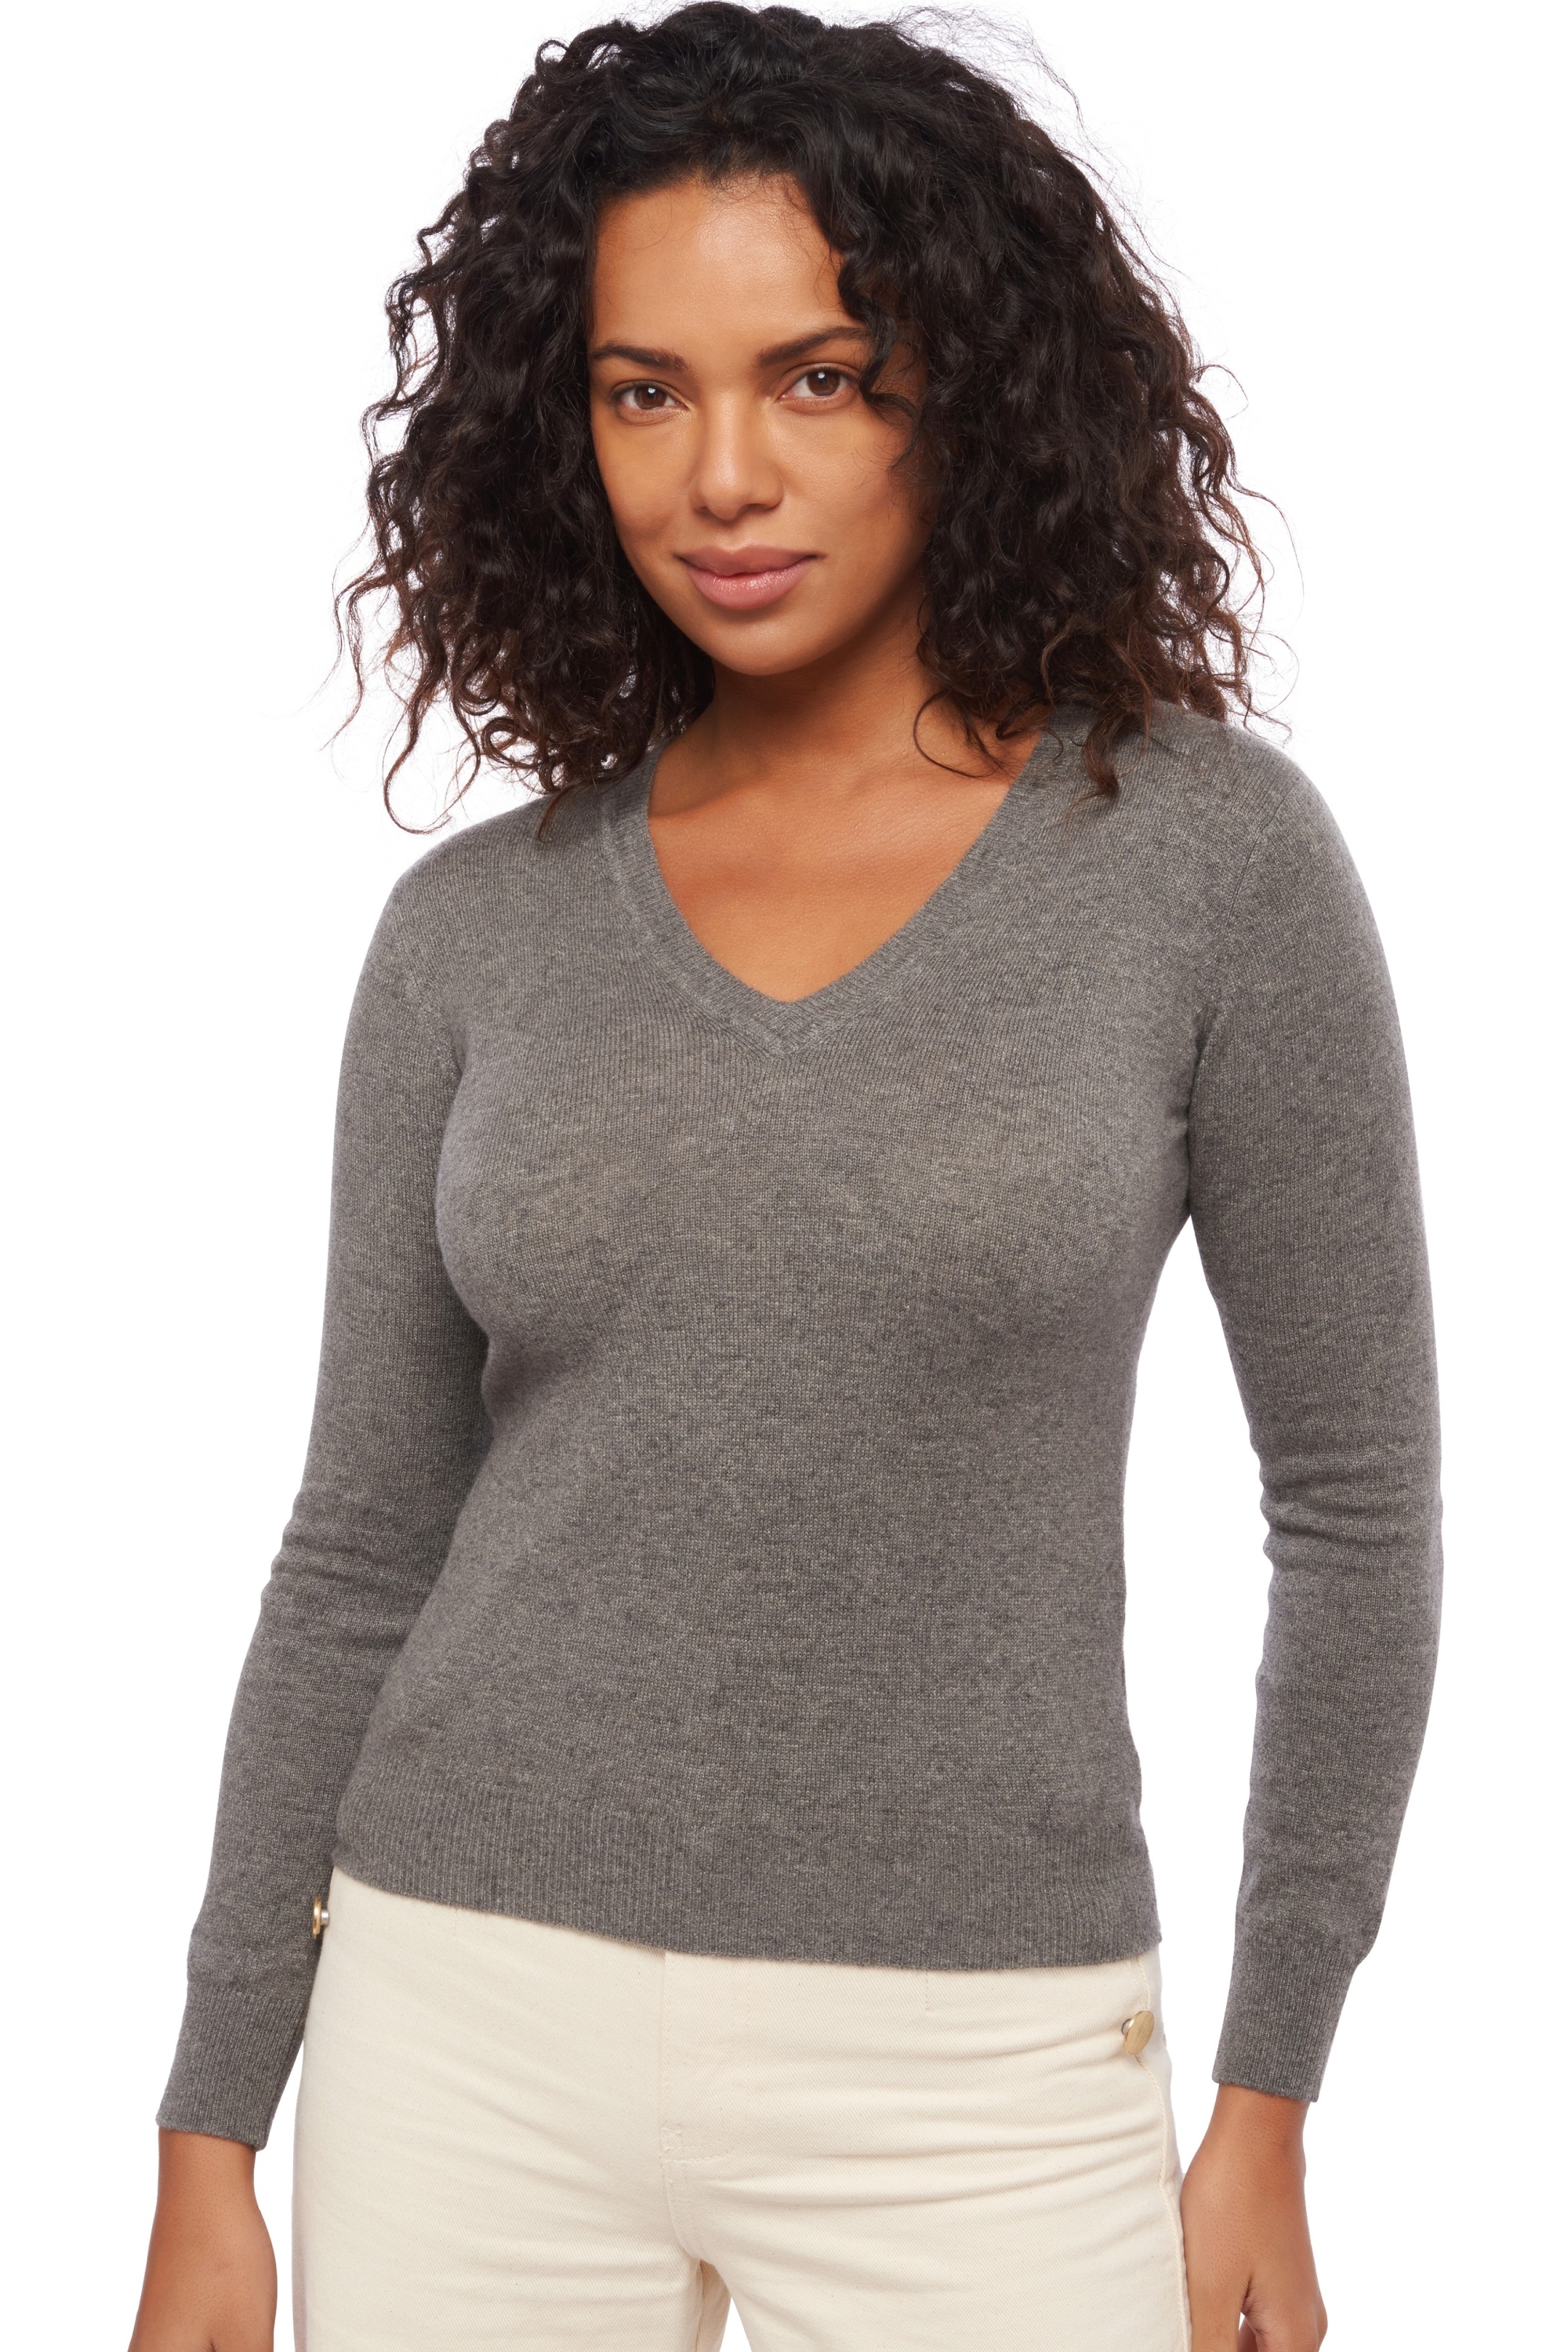 Cashmere ladies timeless classics faustine dove chine s